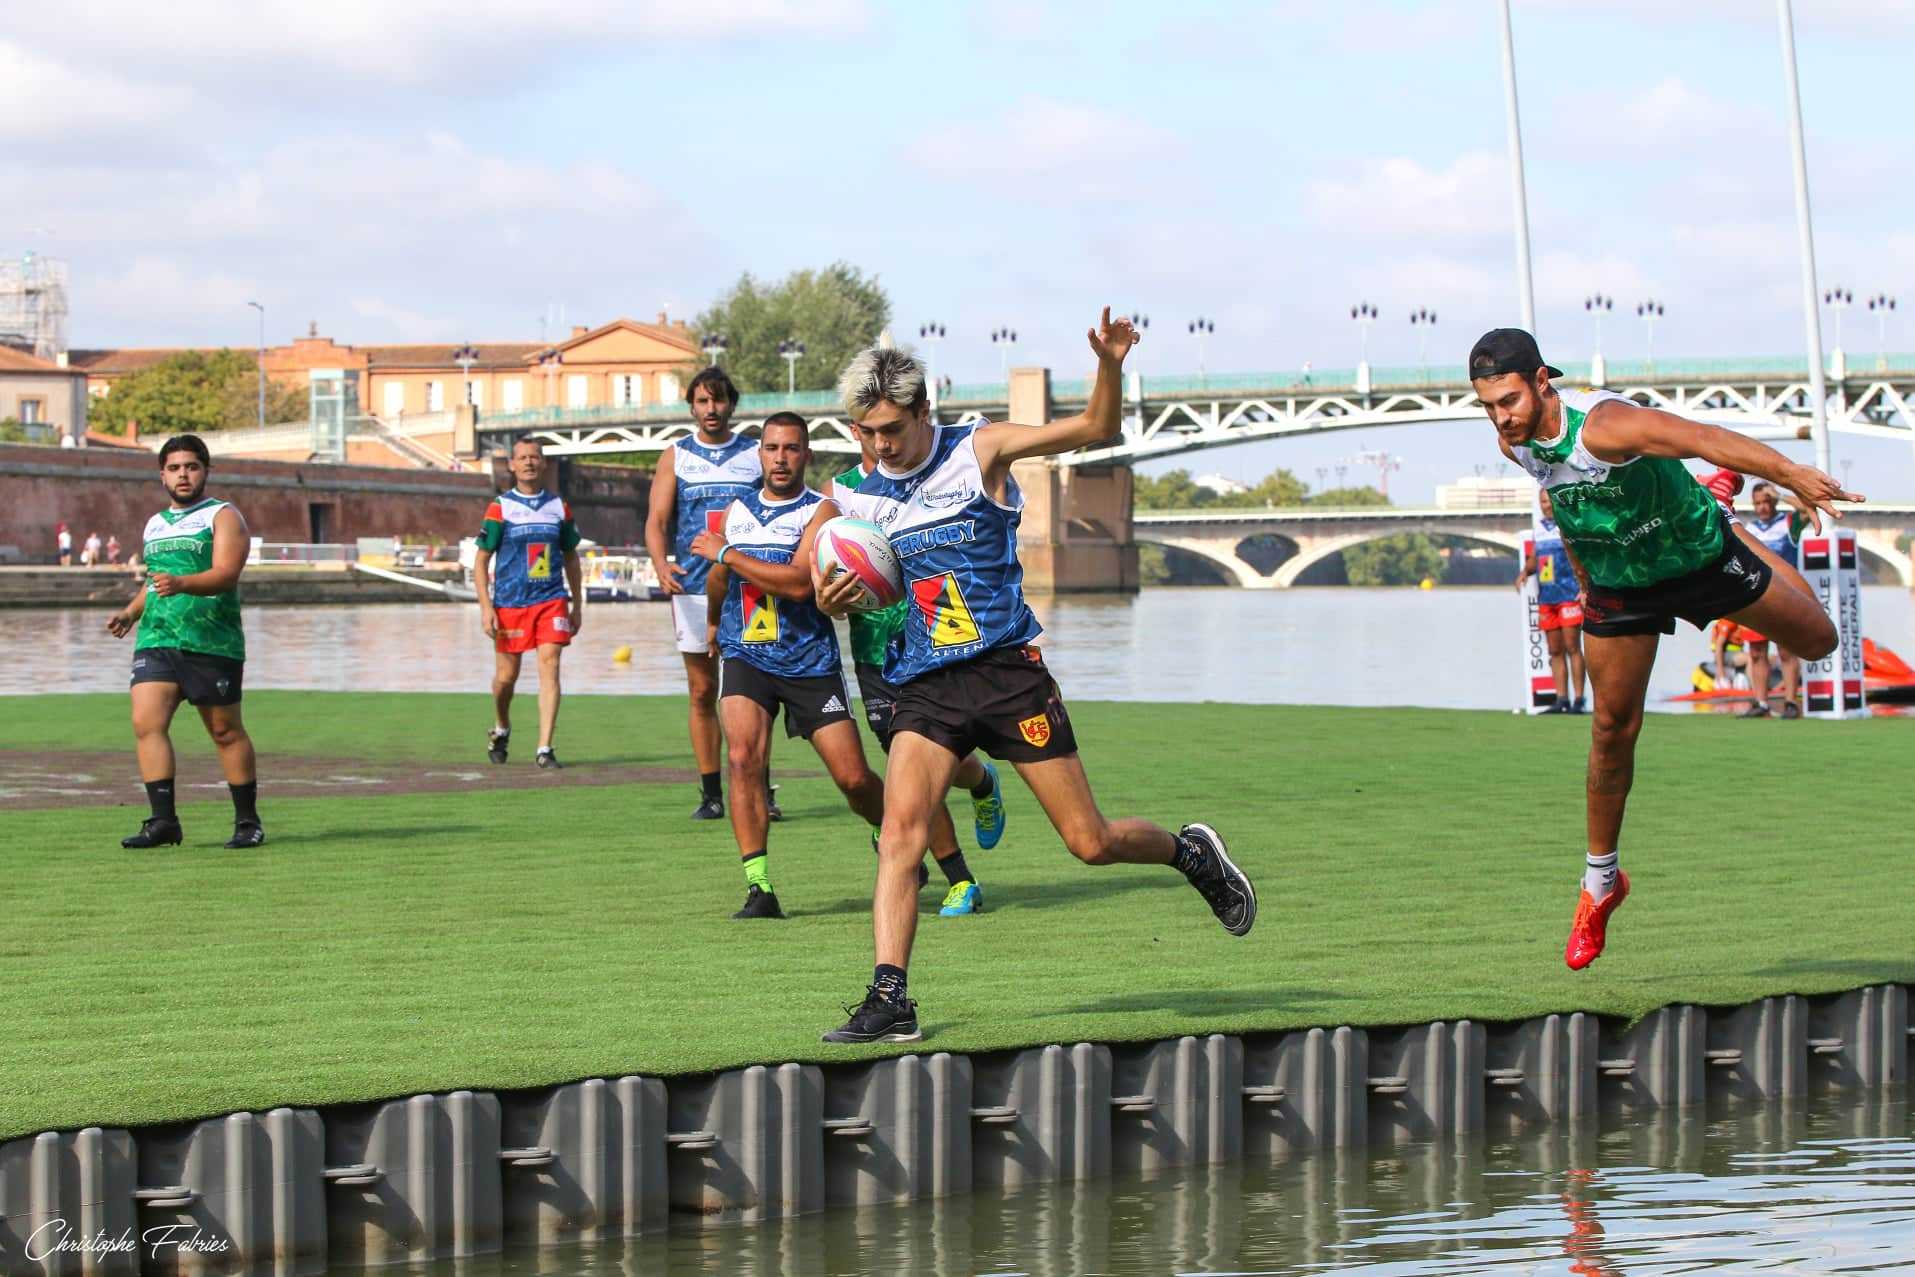 waterugby2021 (8)